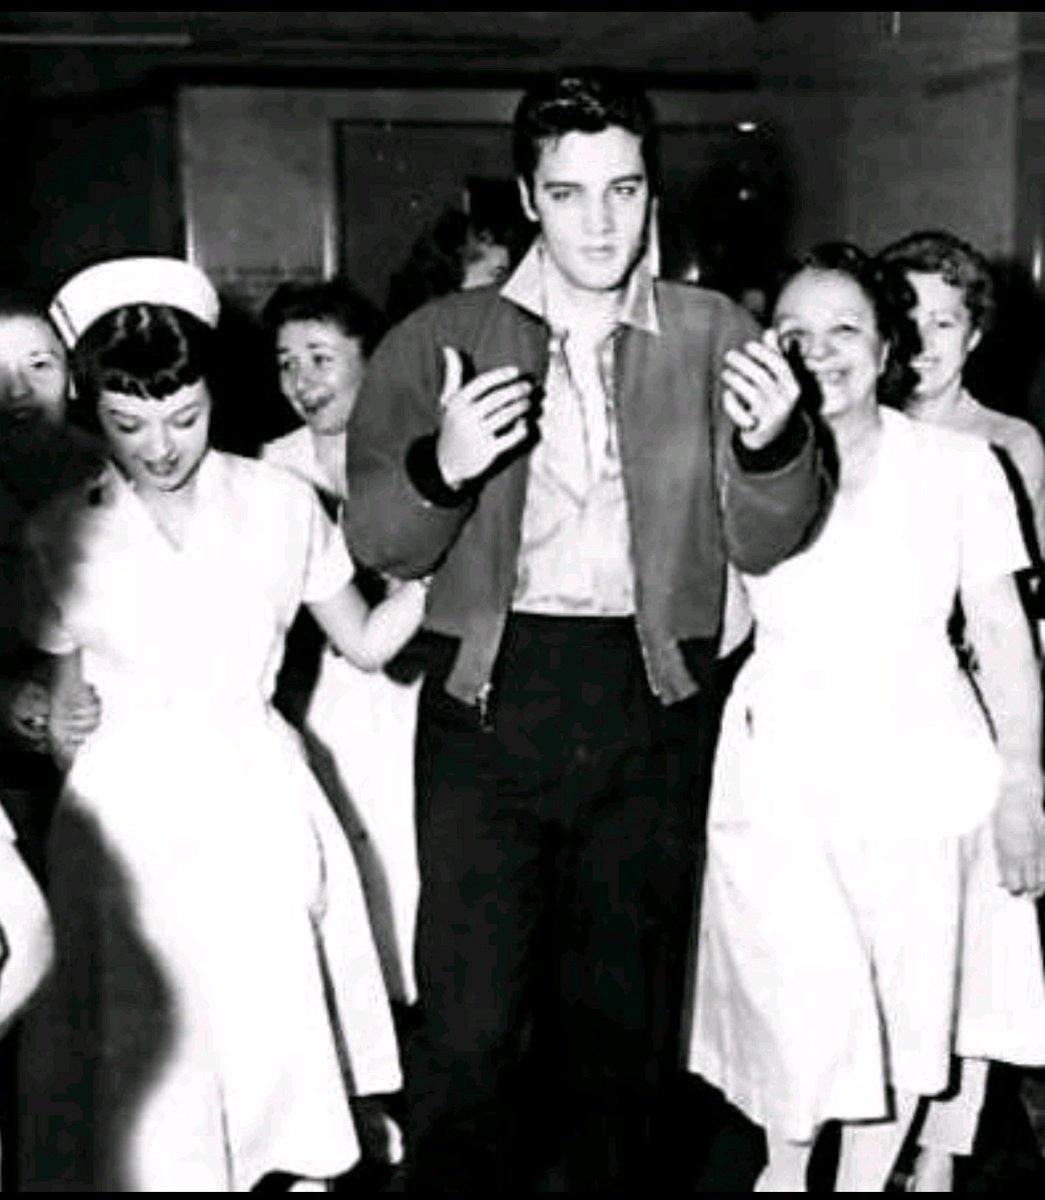 May 14, 1957;
Jailhouse Rock while working on the dance sequence in Jailhouse Rock, Elvis swallowed a cap from one of his teeth.
Taken to a Los Angeles hospital to have it removed from his lung, and was released the next day.
#ElvisPresley #ElvisHistory